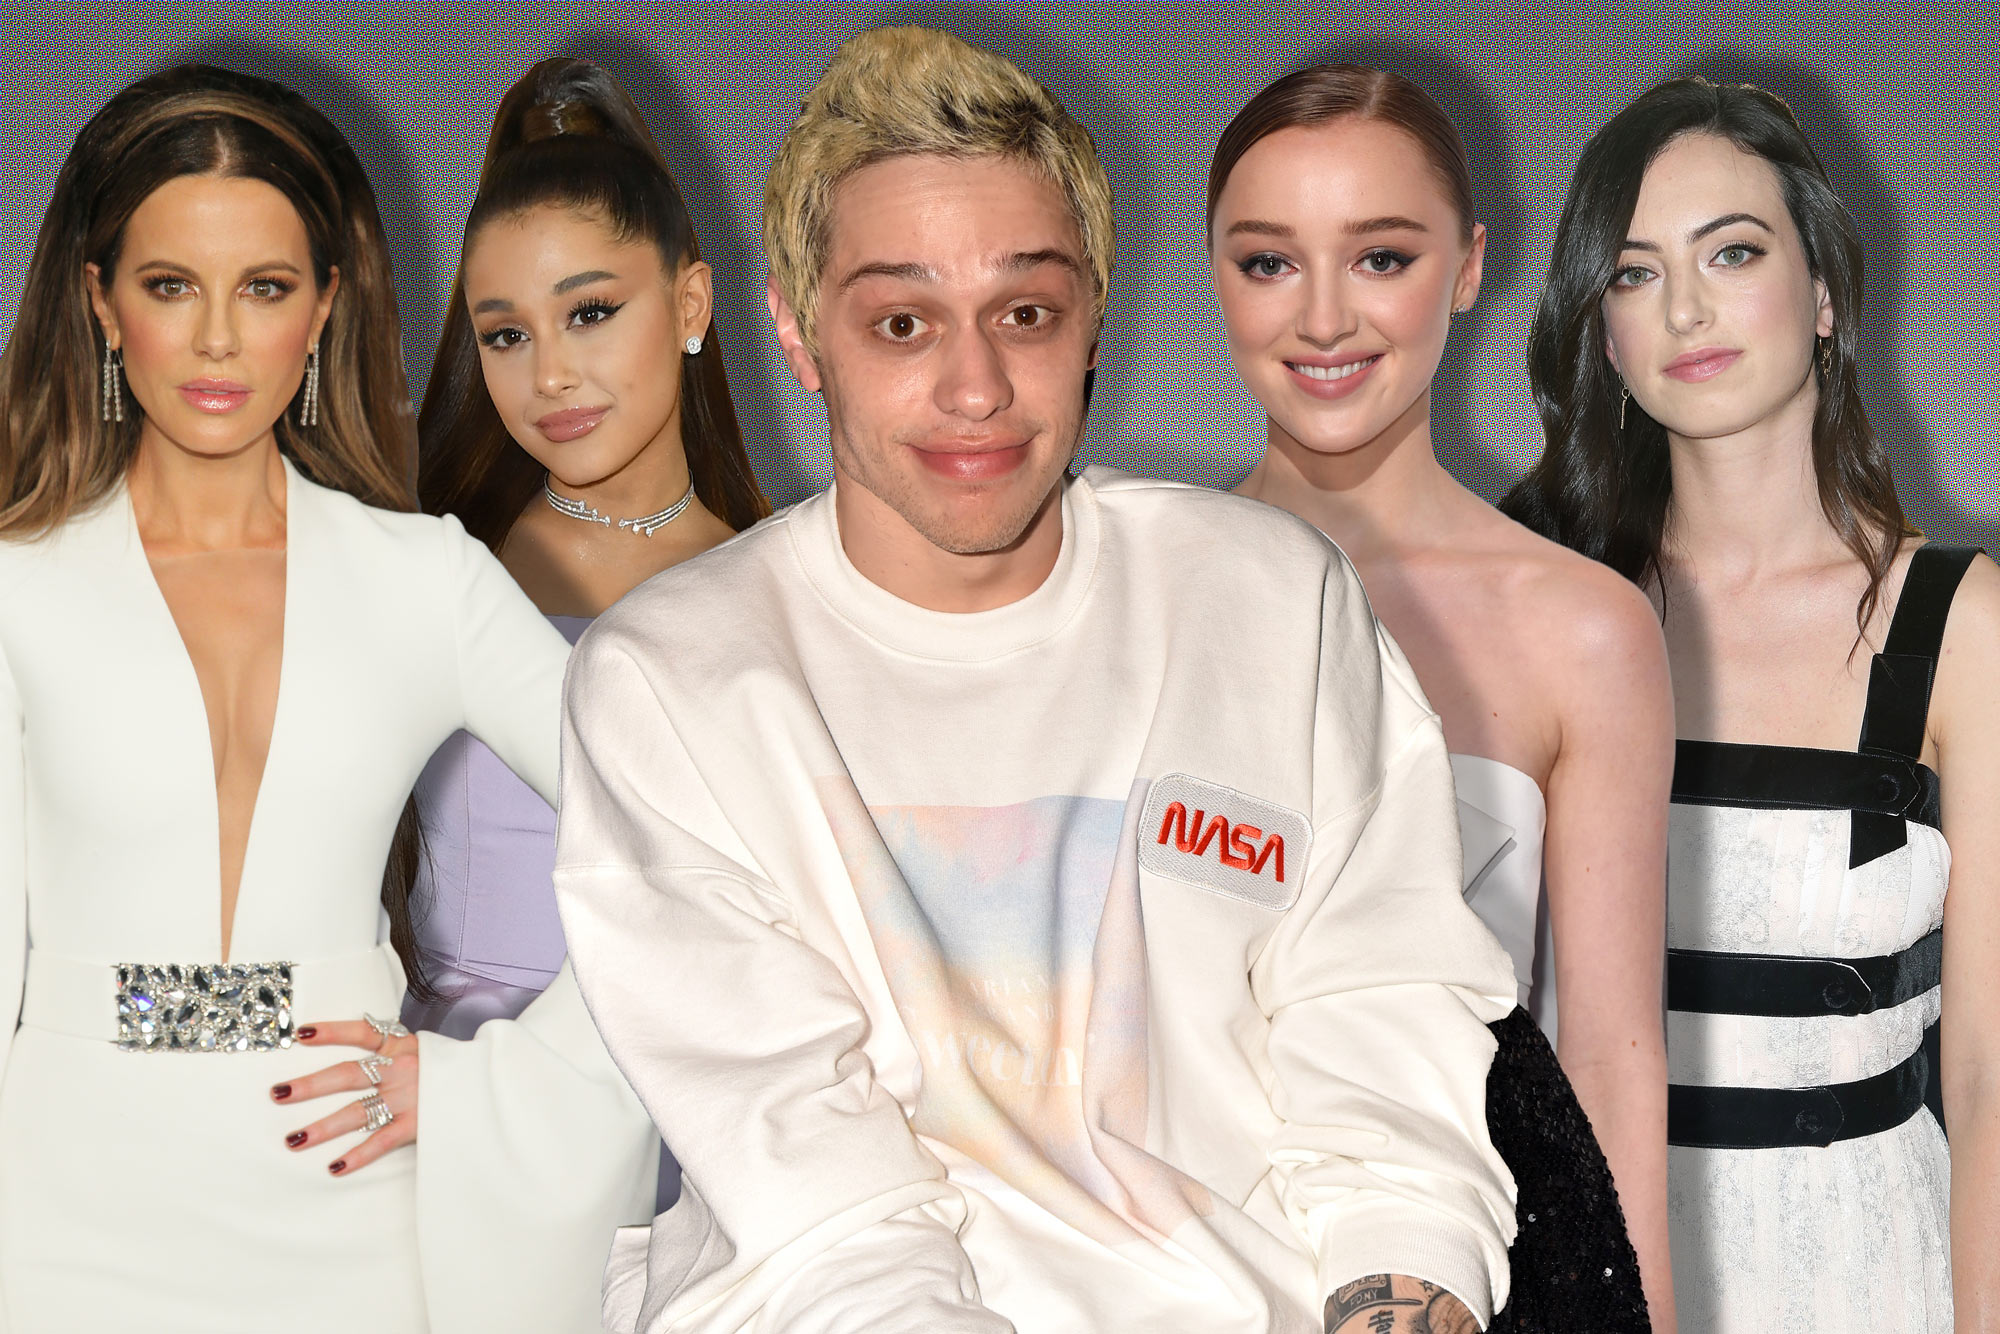 Pete Davidson's dating history His girlfriends and exes